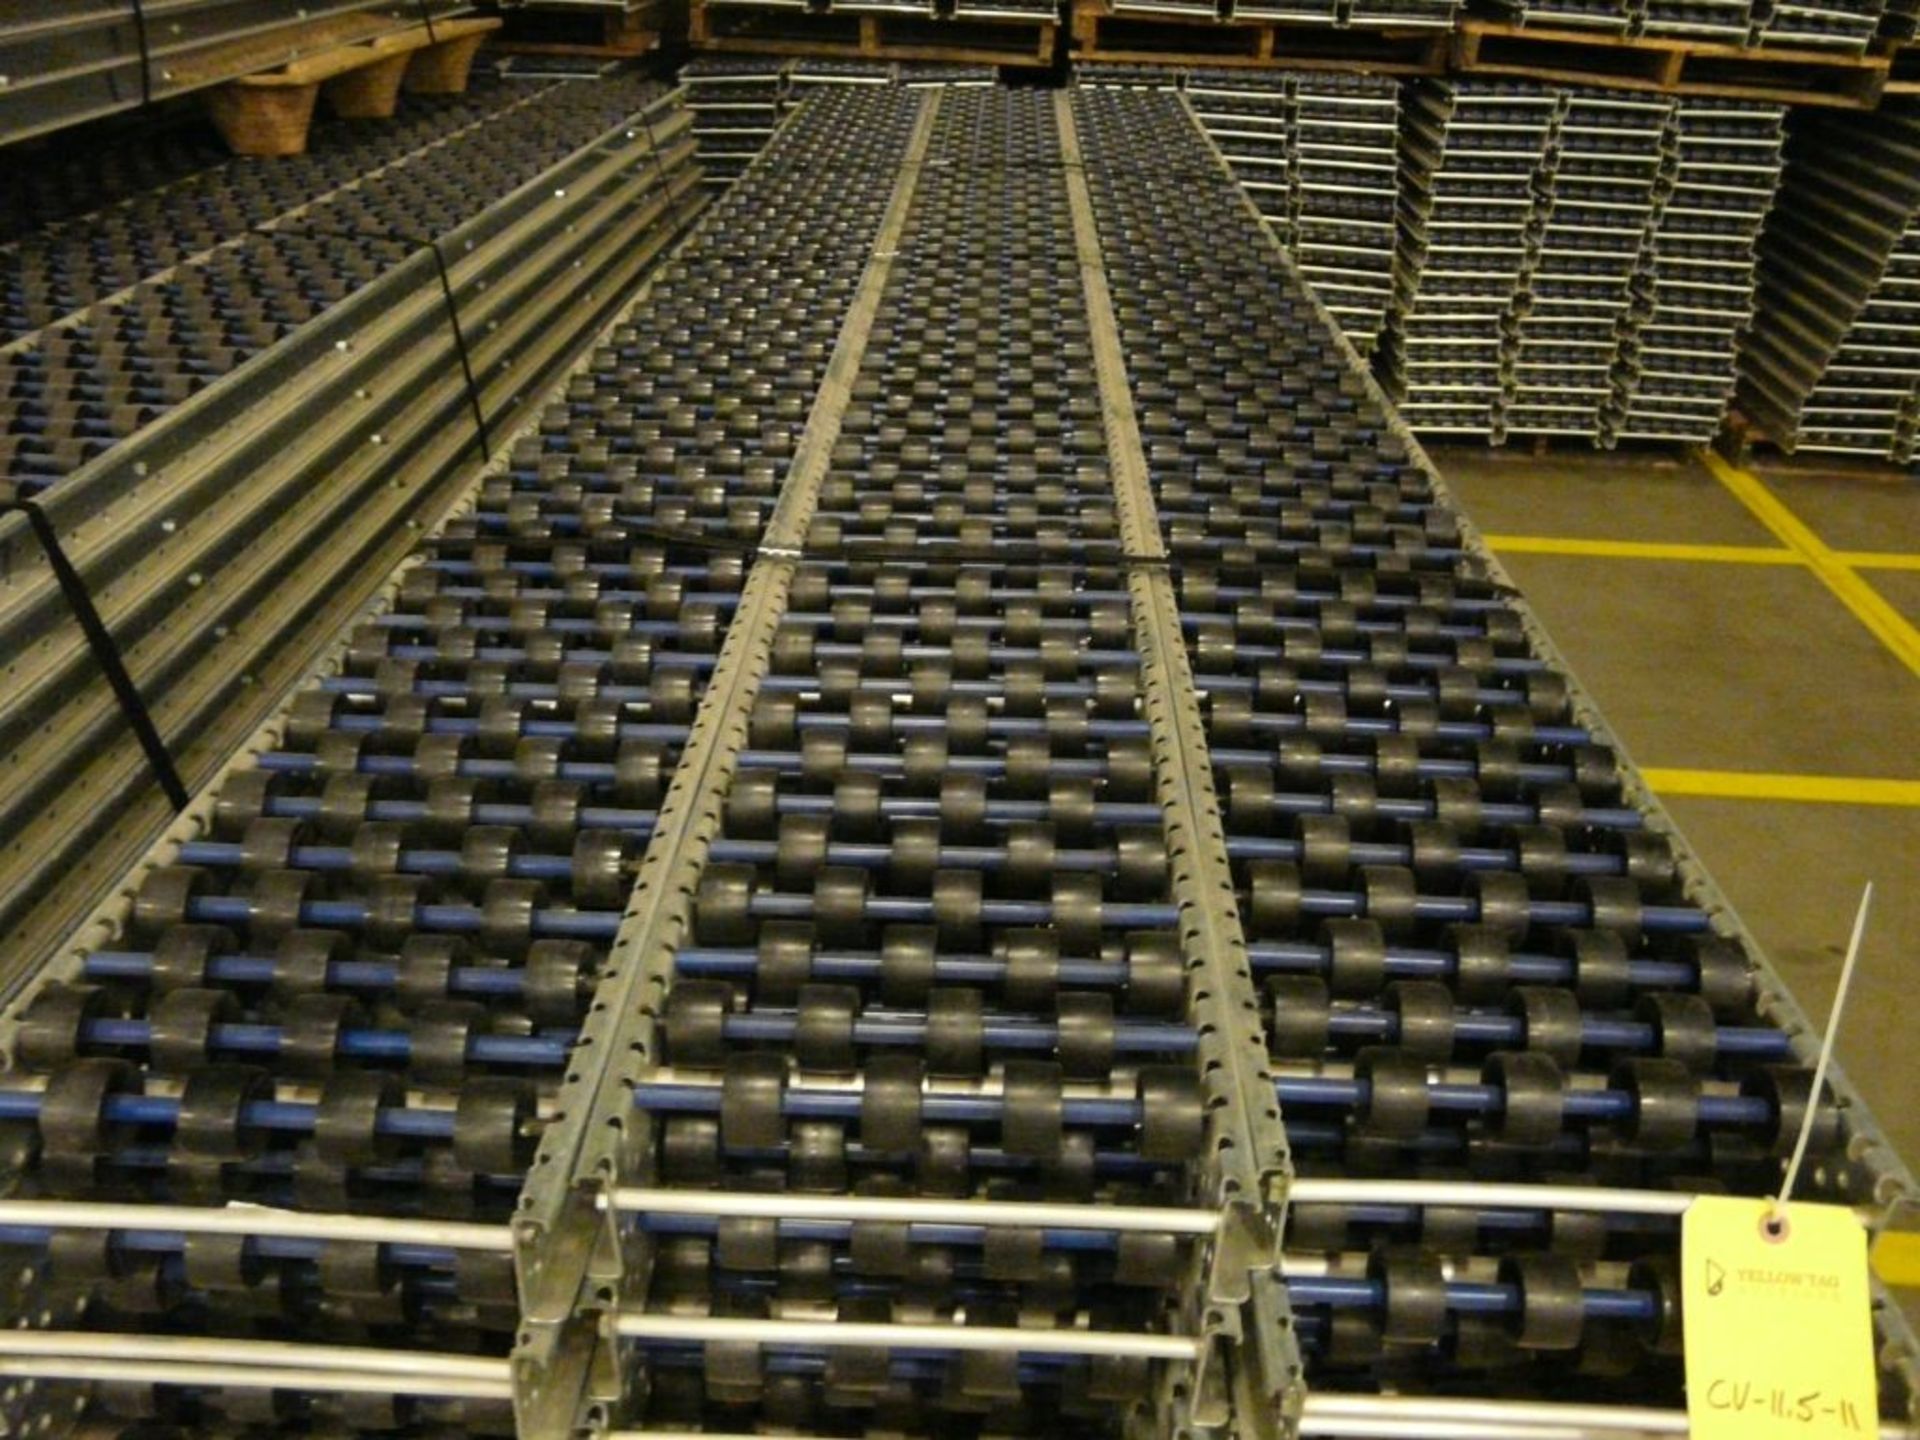 Lot of (90) SpanTrack Wheelbed Carton Flow Conveyors - 11.5'L x 11"W; Tag: 223632 - $30 Lot - Image 3 of 4